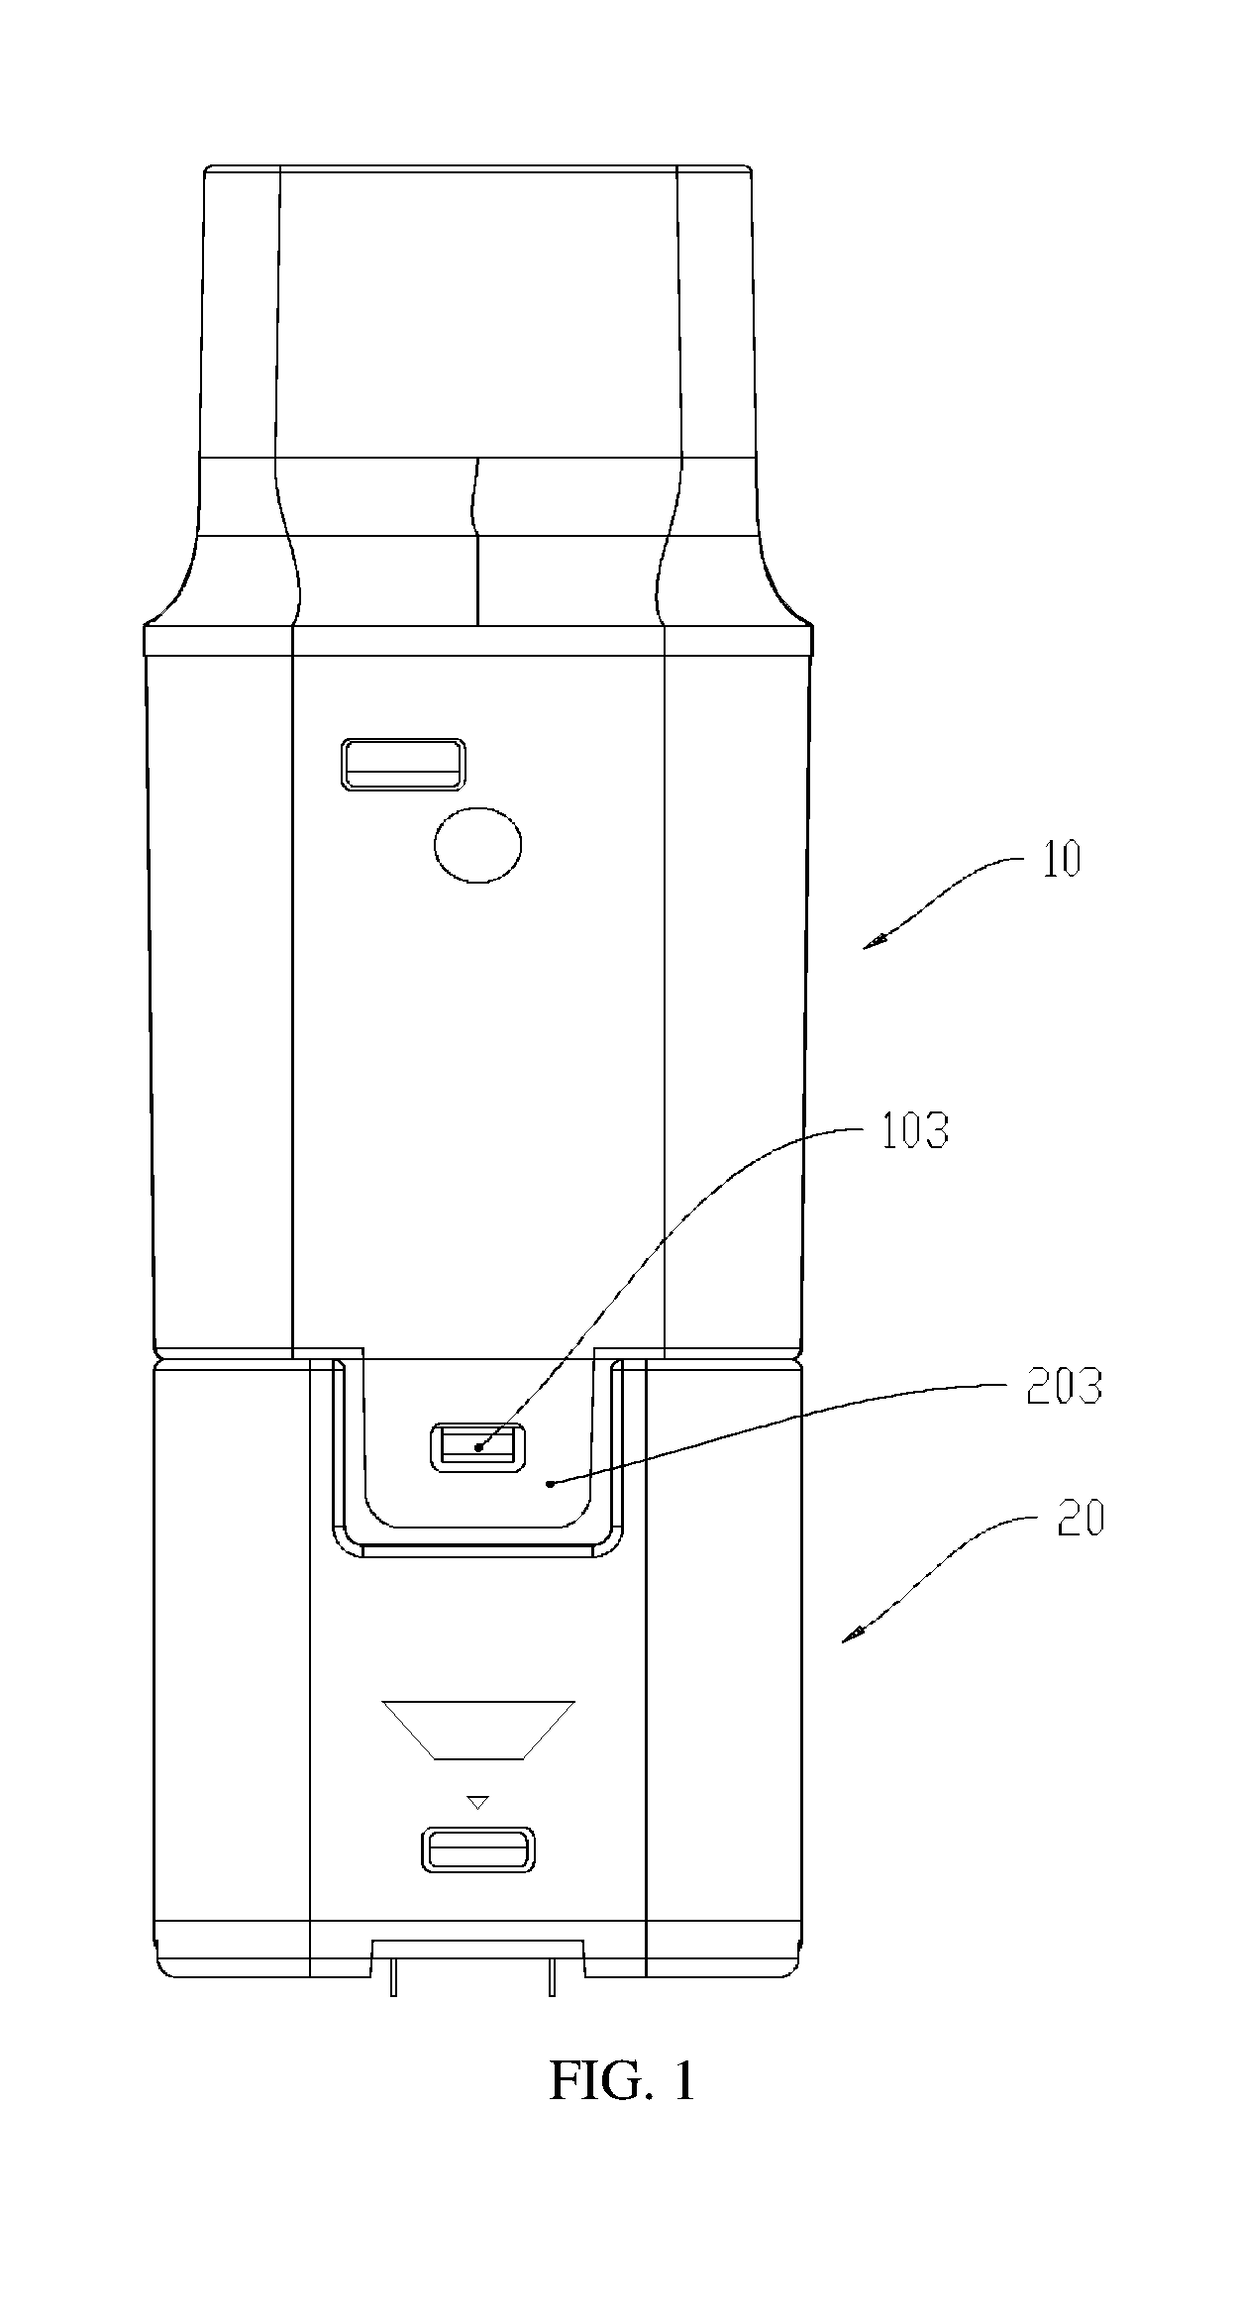 Atomizer compartment structure